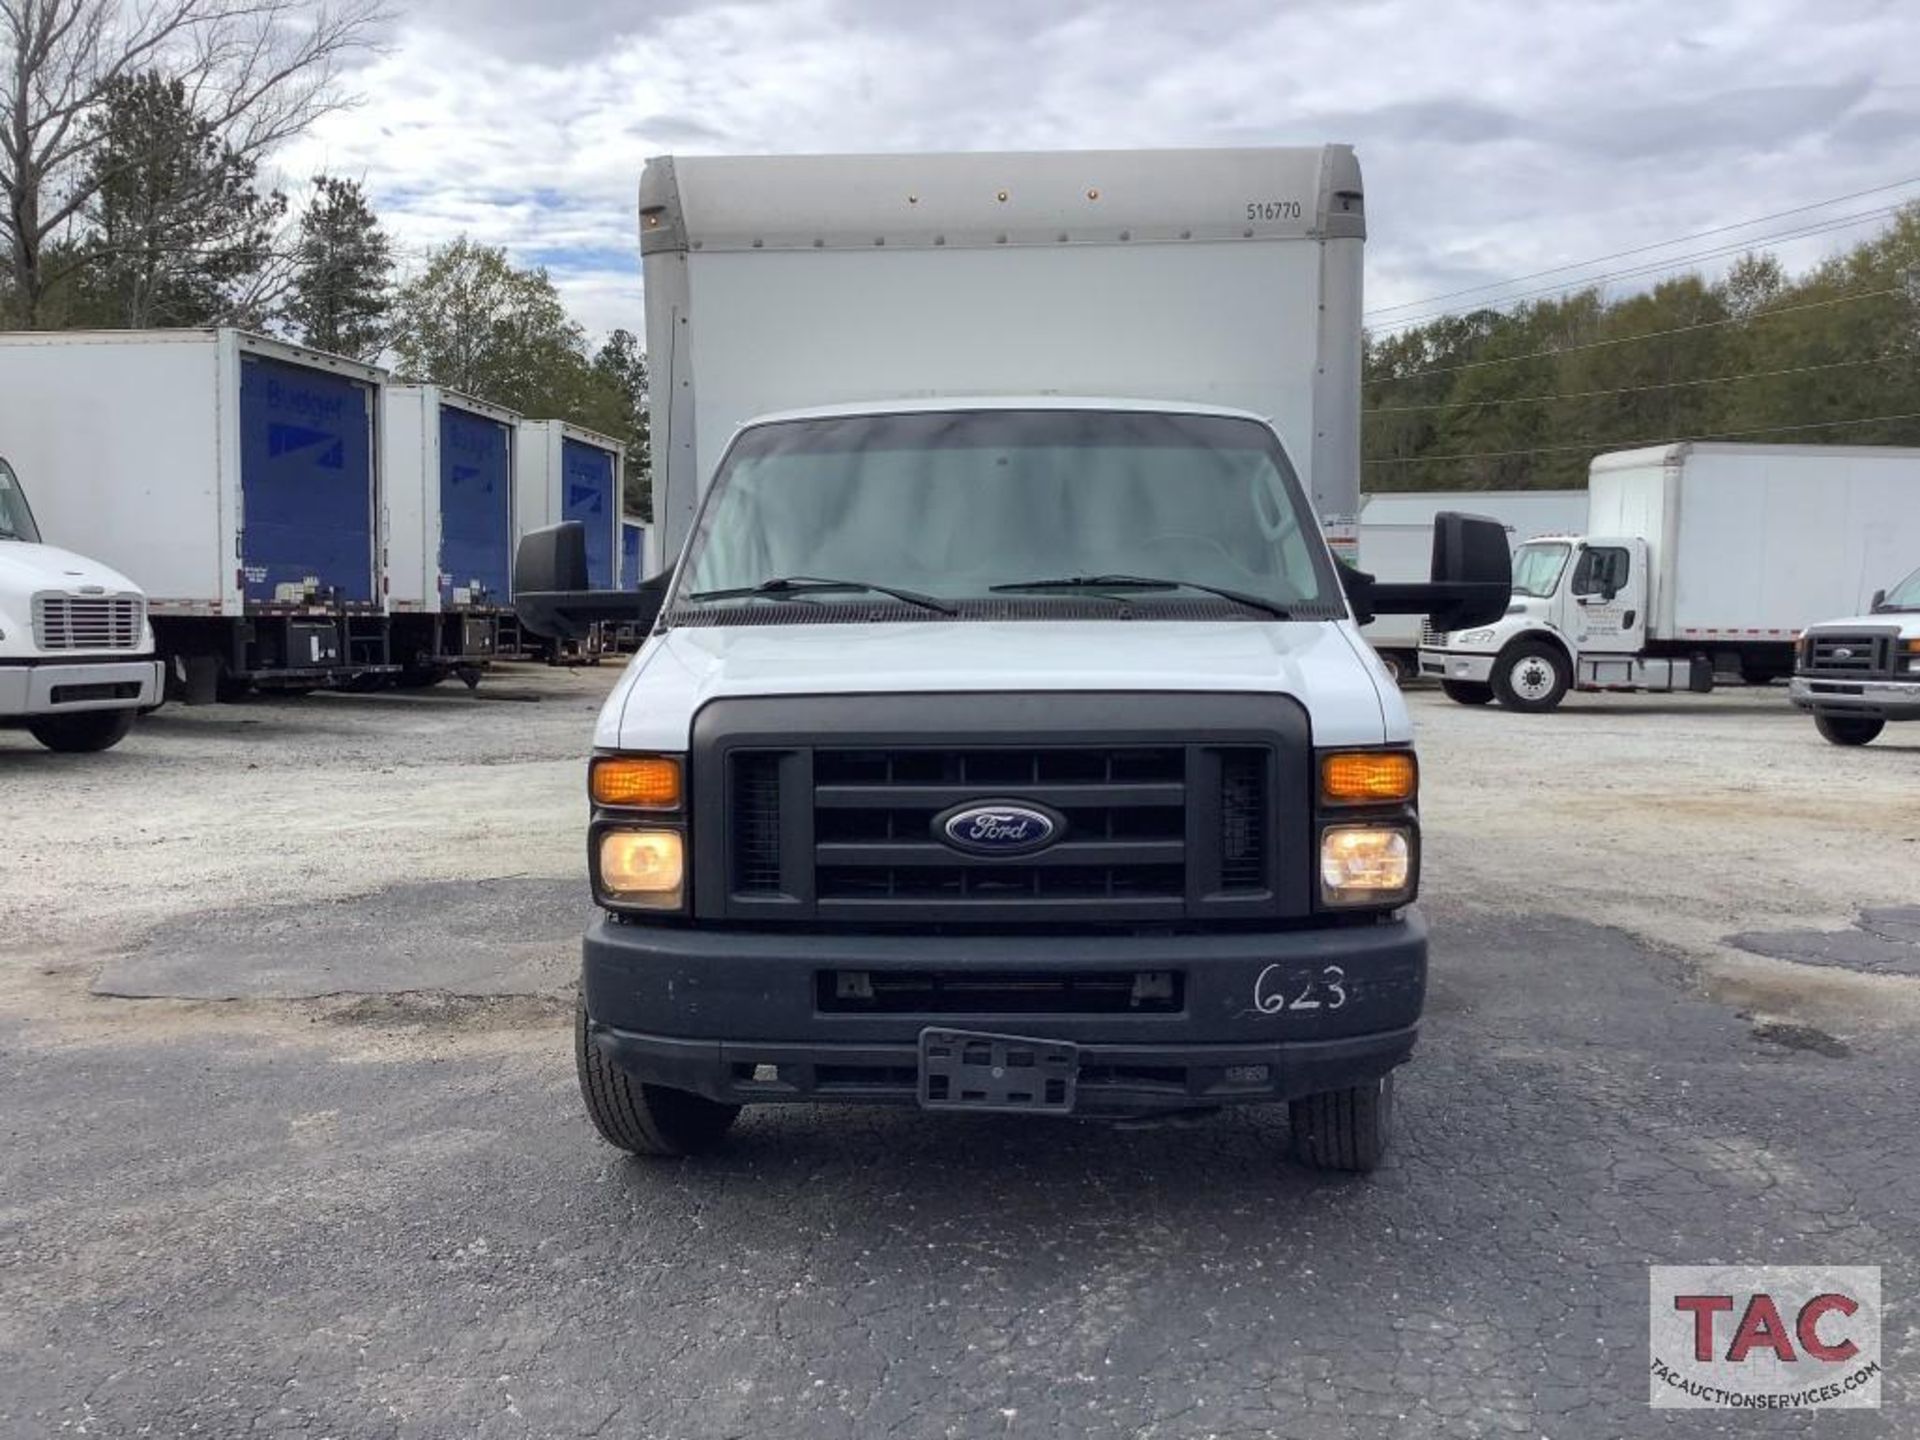 2015 Ford E-350 Box Truck - Image 2 of 49